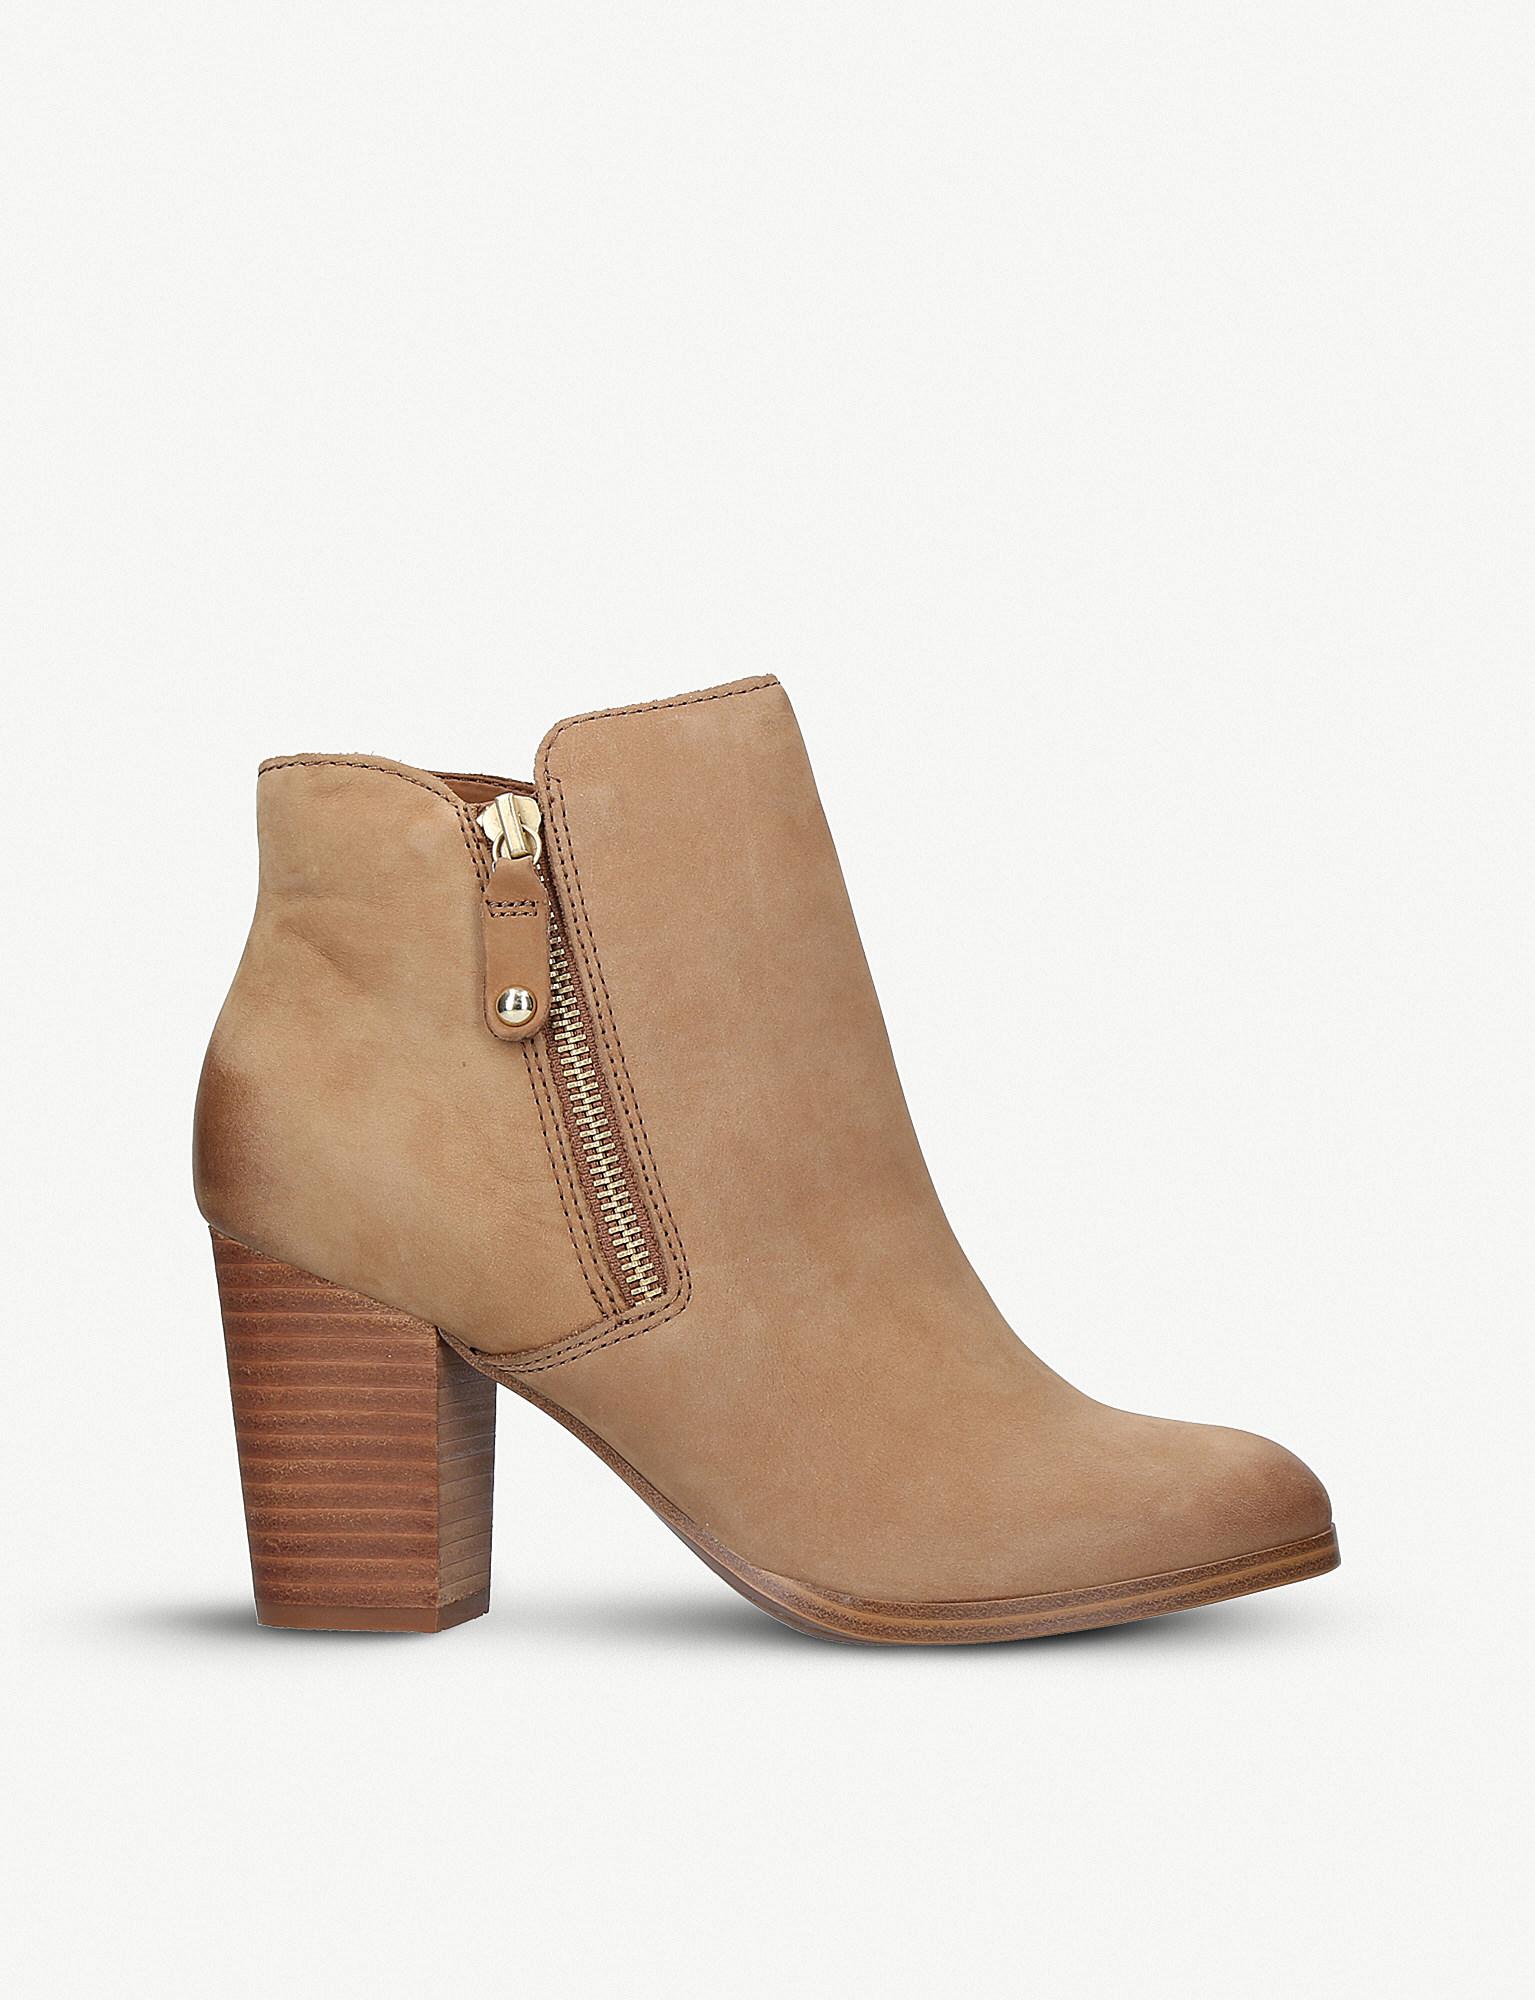 ALDO Naedia Leather Ankle Boots in Tan (Brown) - Lyst